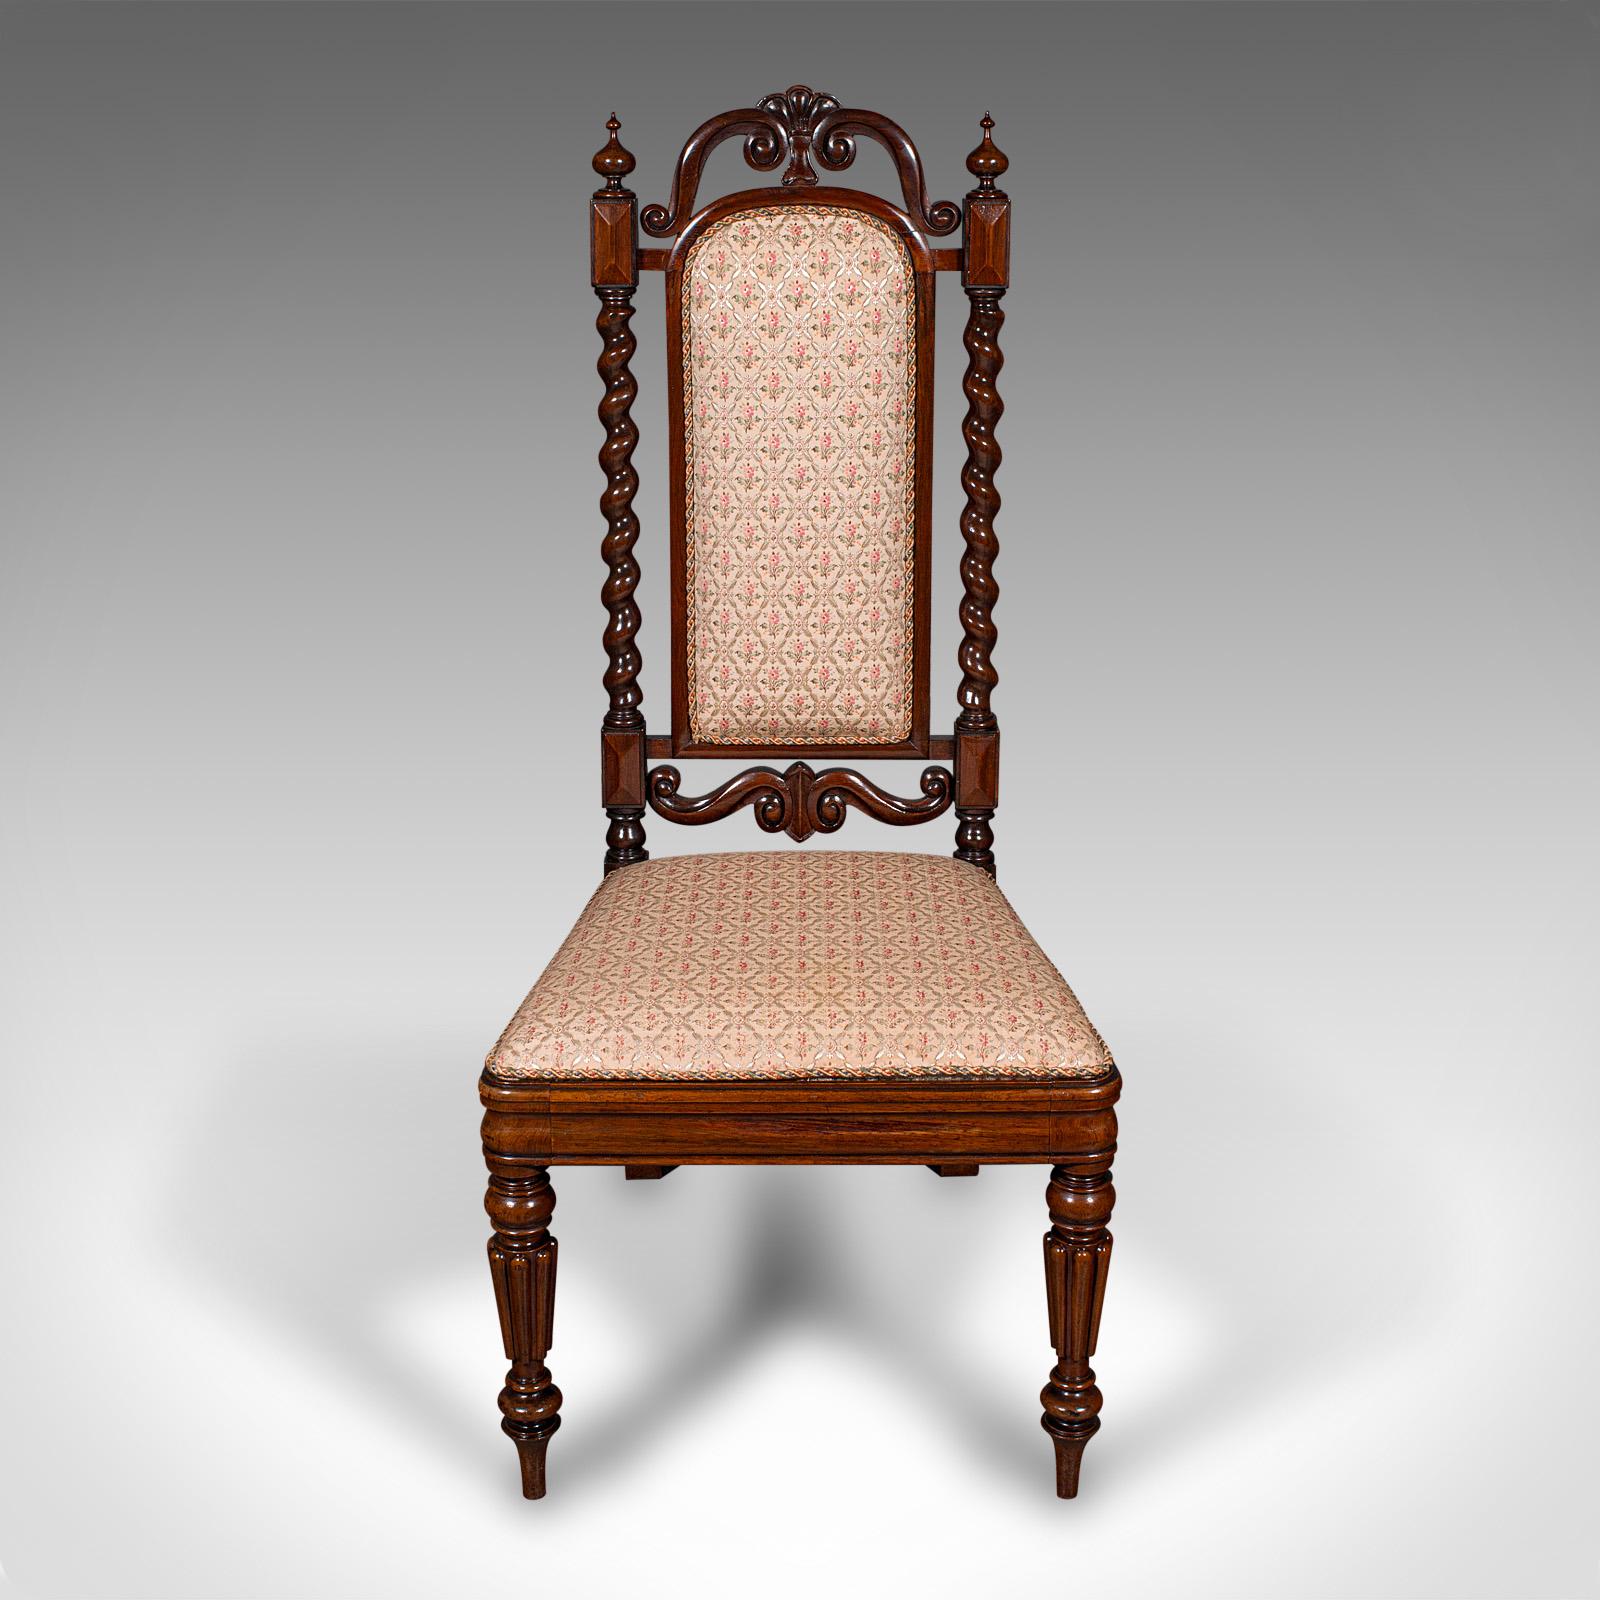 This is an antique morning room chair. An English, rosewood and embroidered silk cotton side seat, dating to the William IV period, circa 1835.

Exquisite upholstery over a beautifully crafted frame
Displays a desirable aged patina and in good